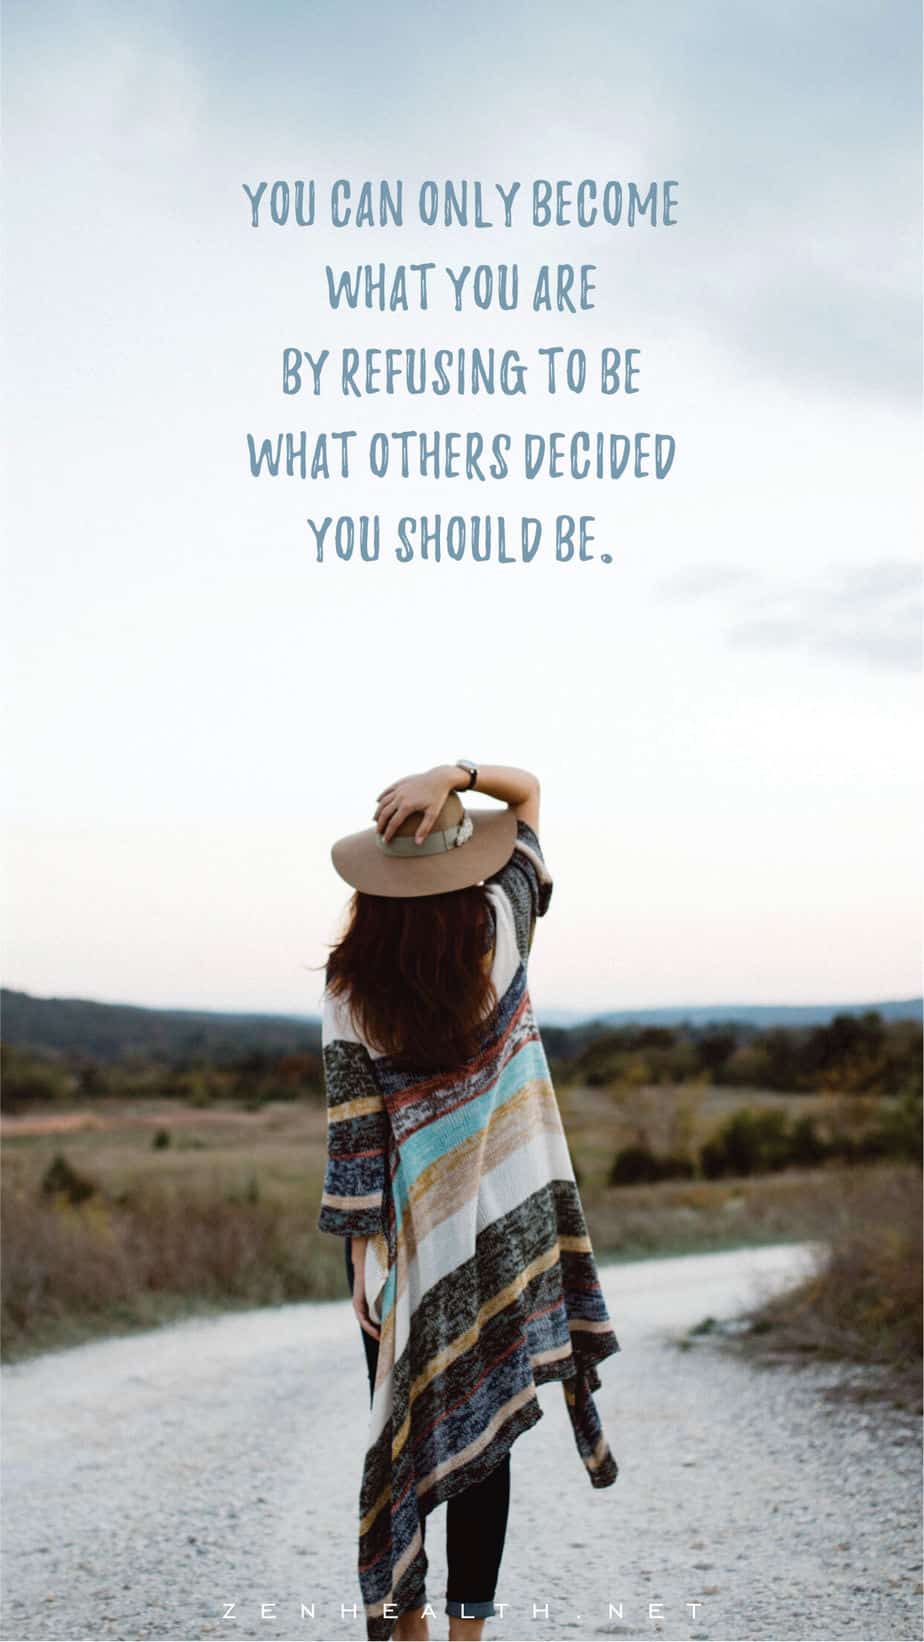 You can only become what you are by refusing to be what others decided you should be.